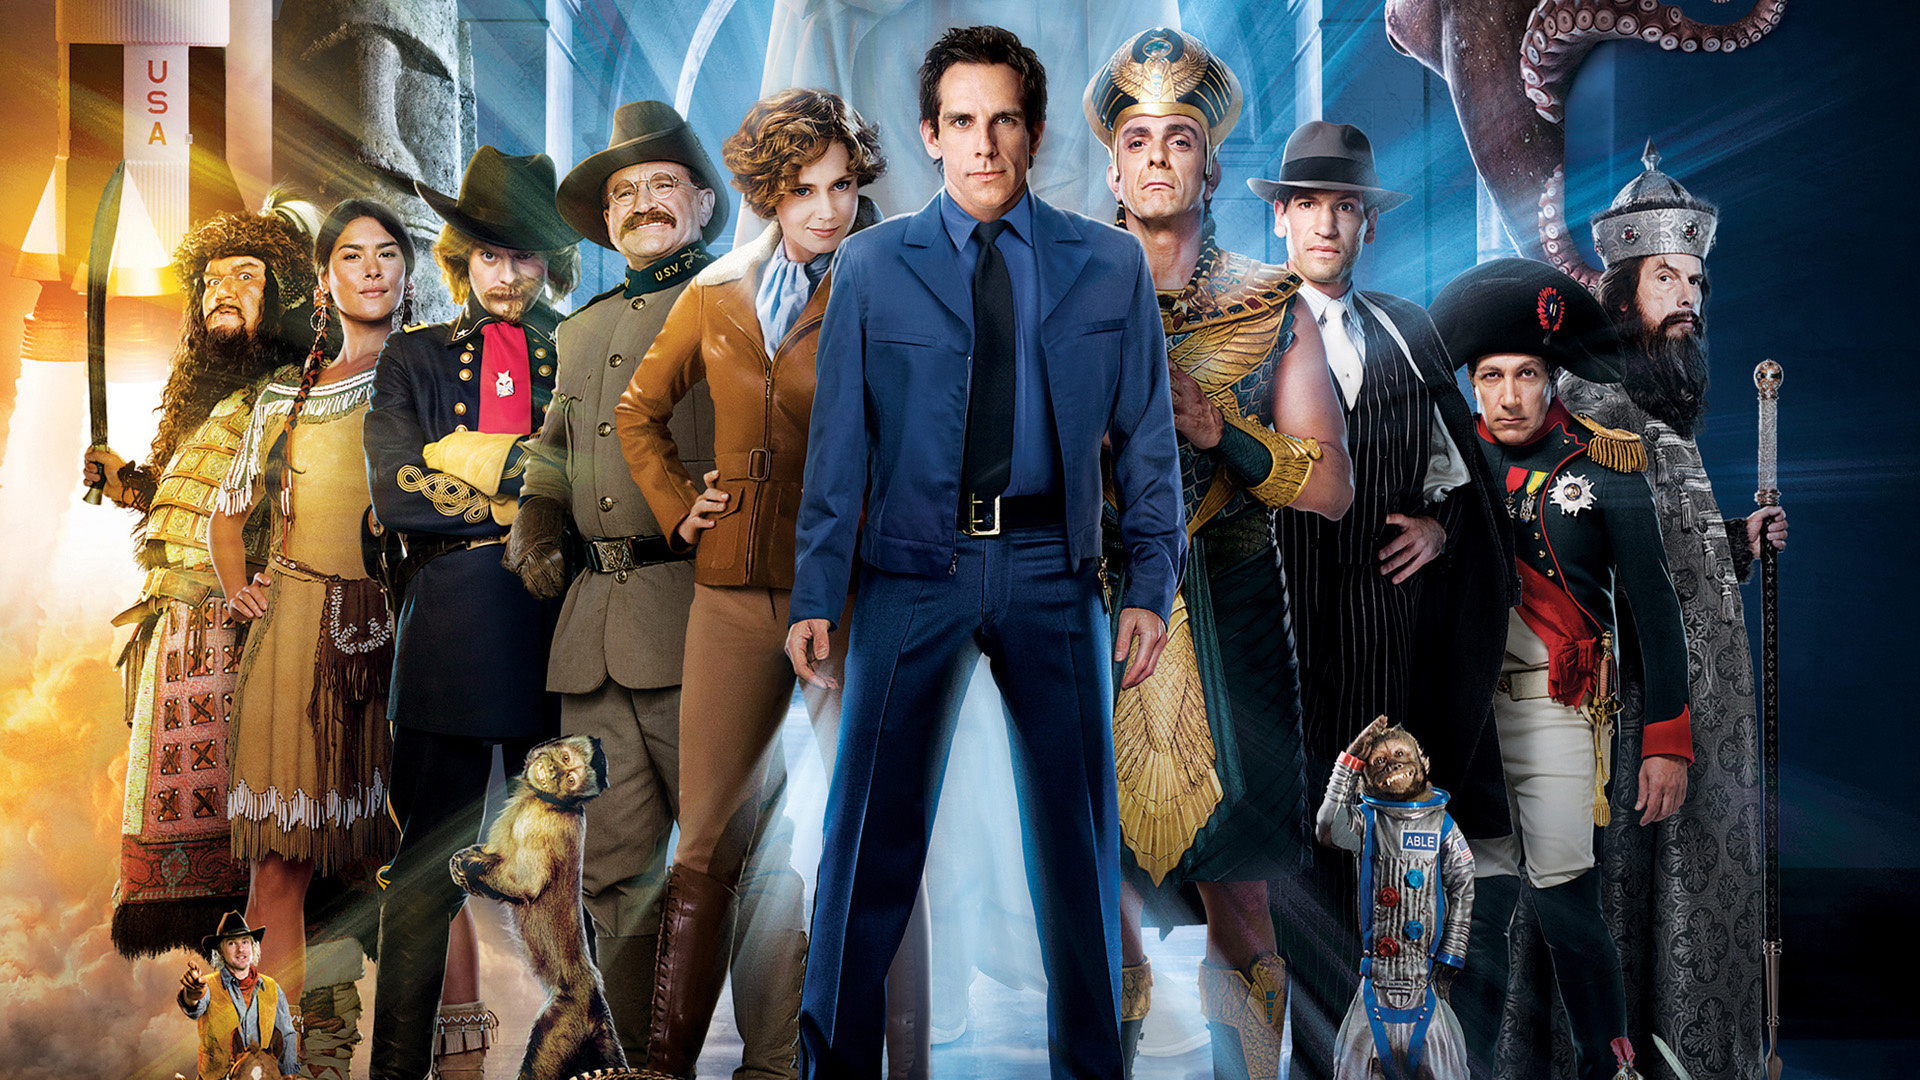 Hank Azaria movies, Night at the Museum wallpapers, Battle of the Smithsonian, 1920x1080 Full HD Desktop